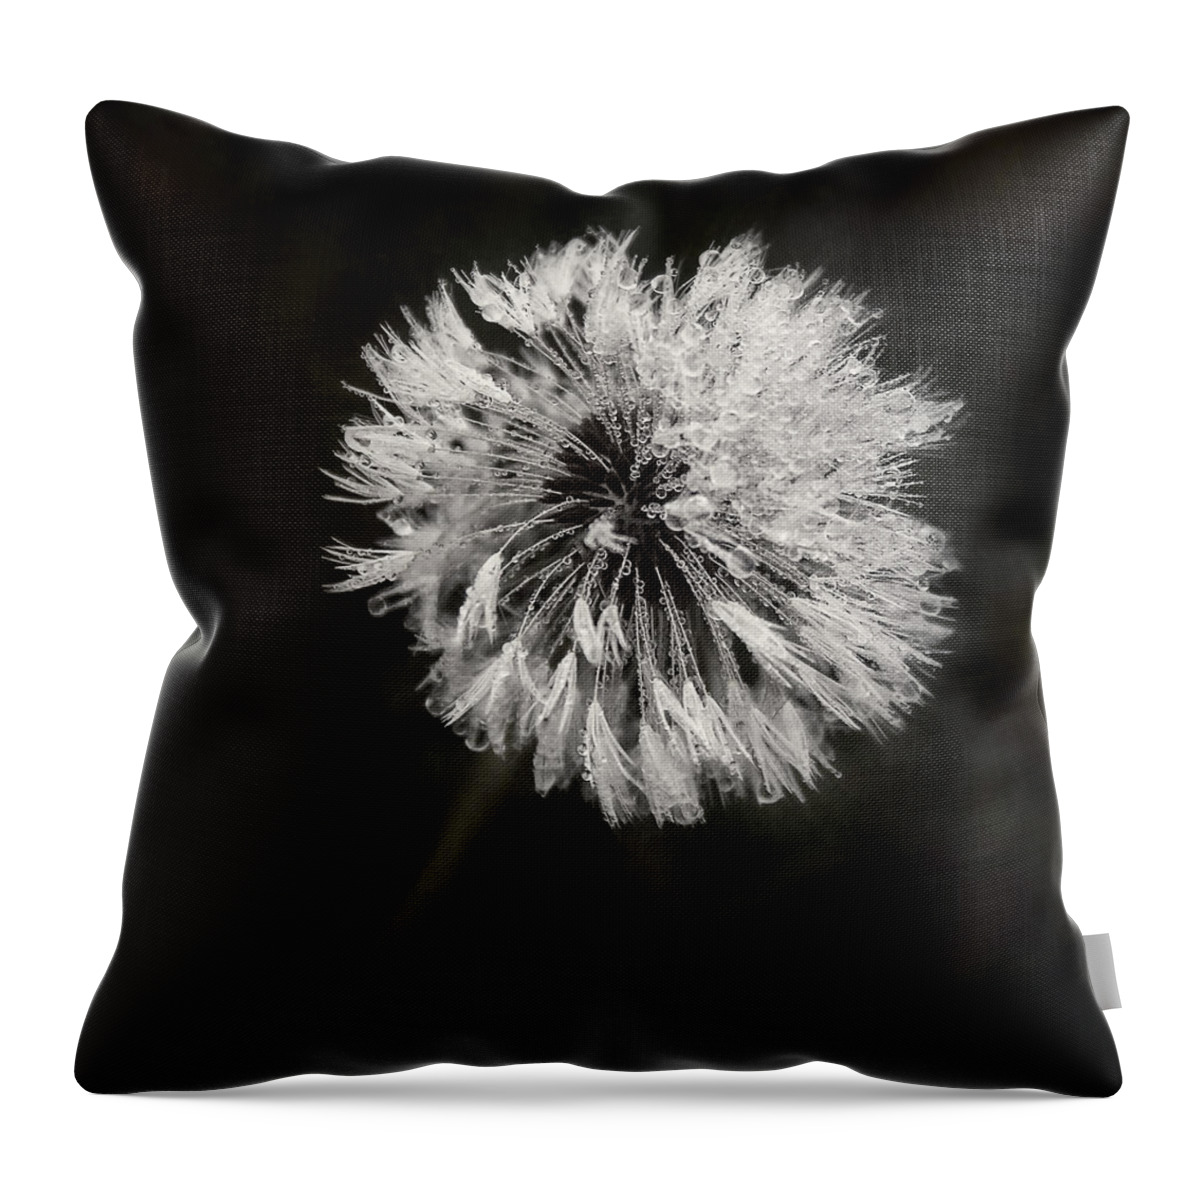 Dandelion Flower Throw Pillow featuring the photograph Water Drops on Dandelion Flower by Scott Norris